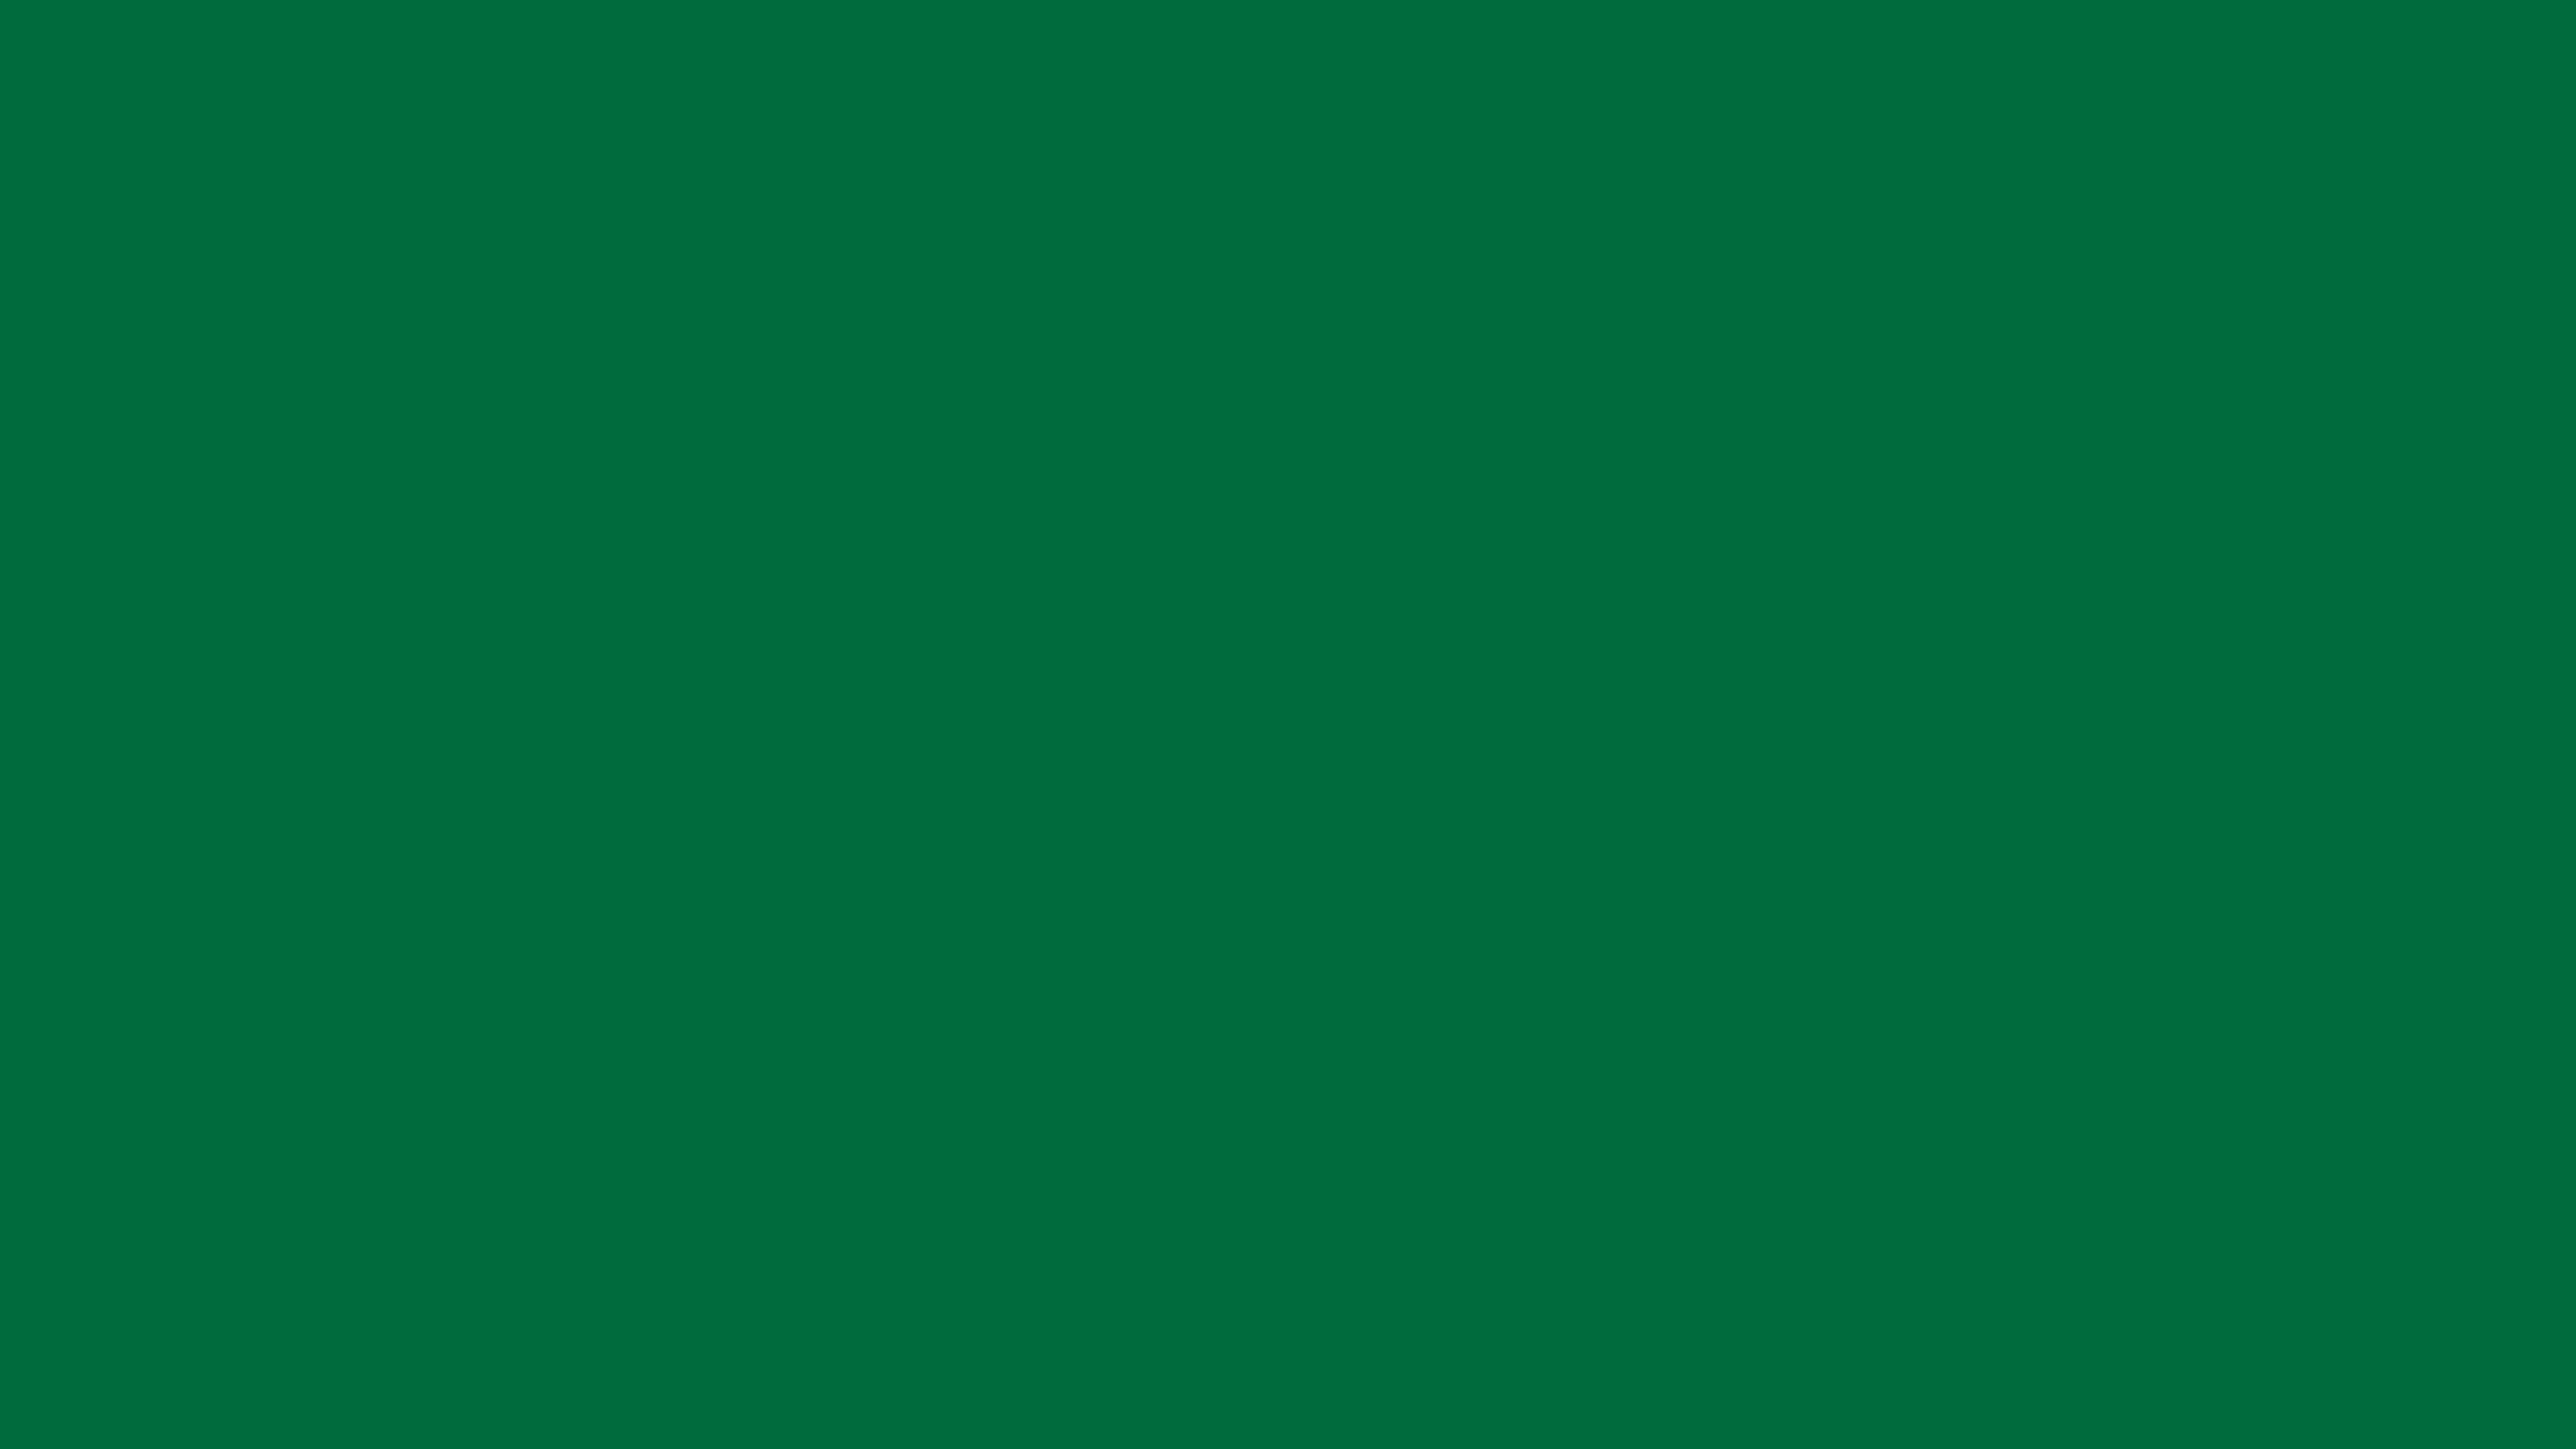 7680x4320 Cadmium Green Solid Color Background